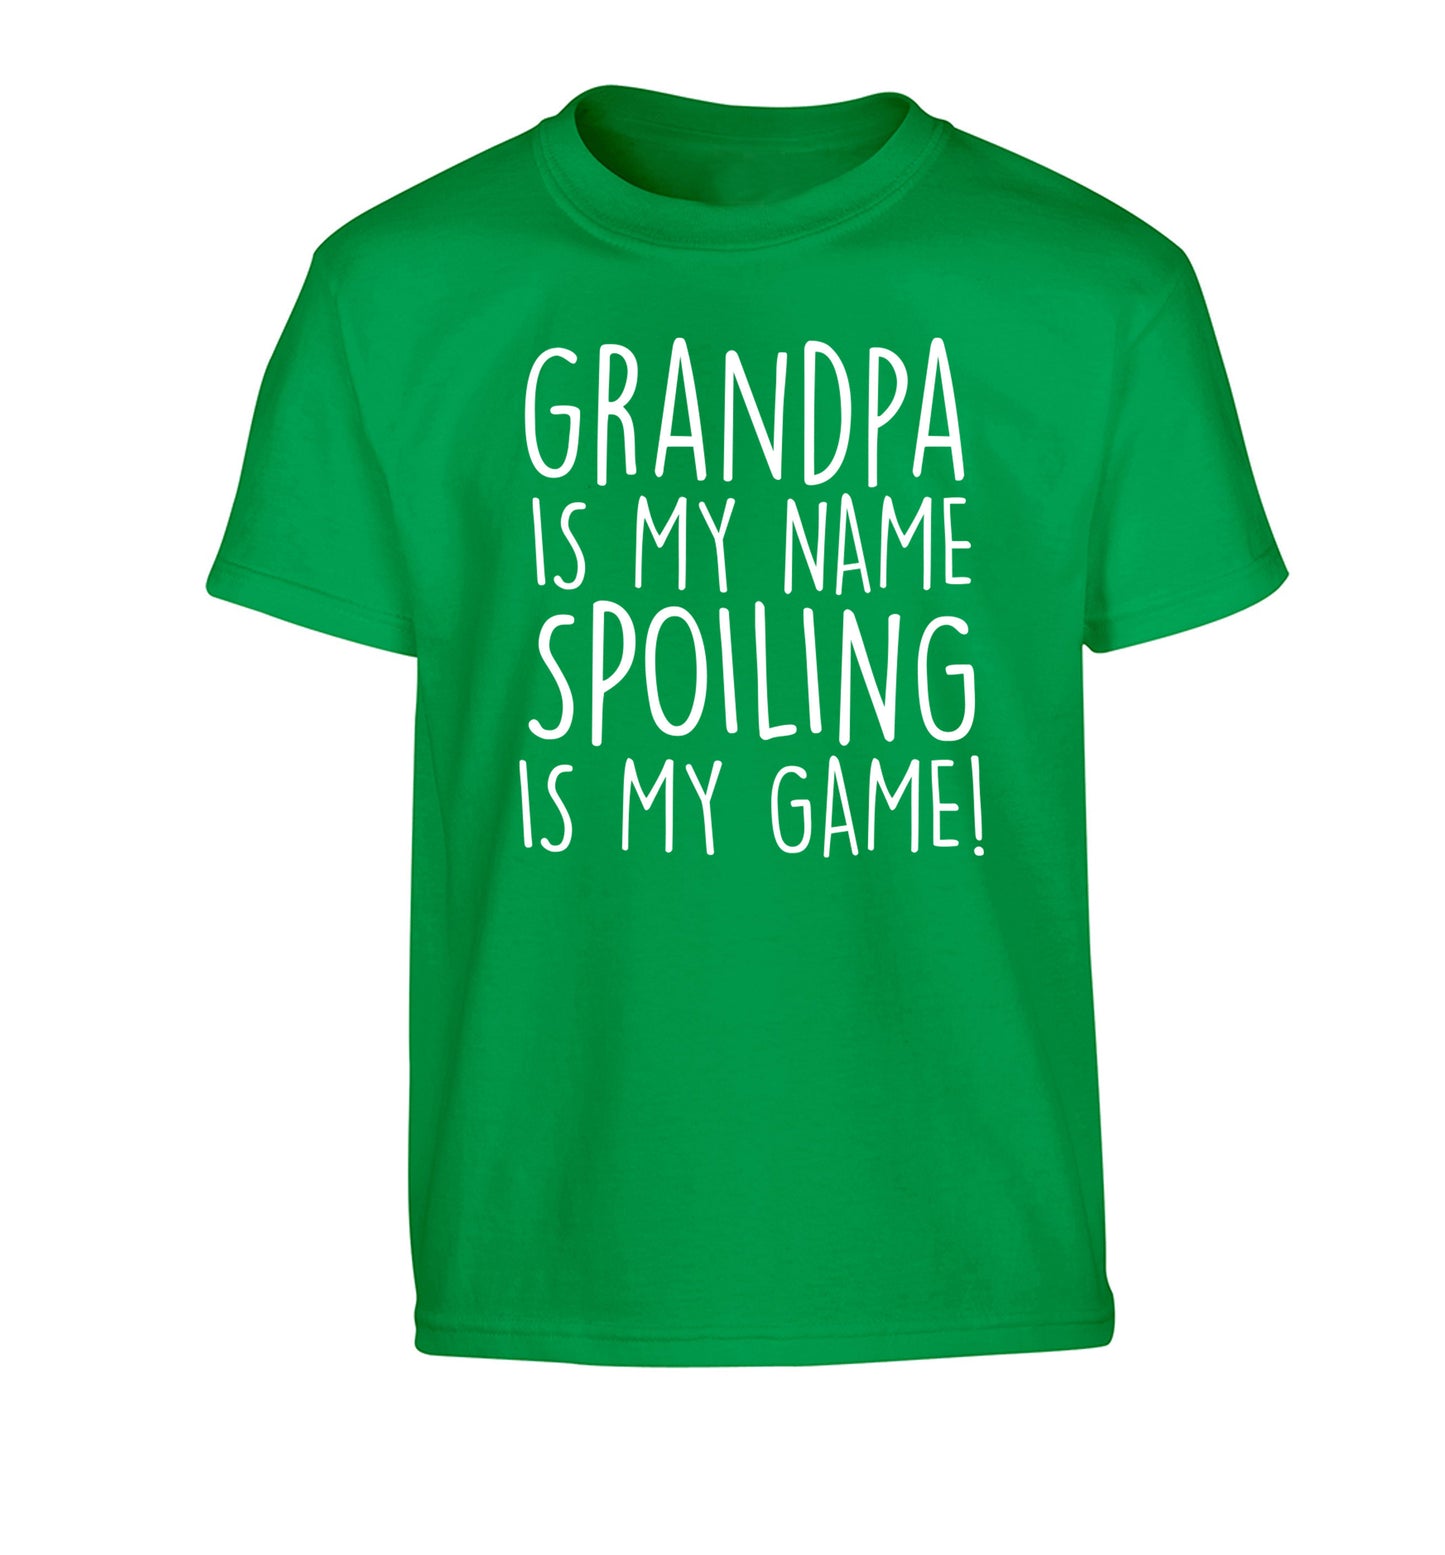 Grandpa is my name, spoiling is my game Children's green Tshirt 12-14 Years